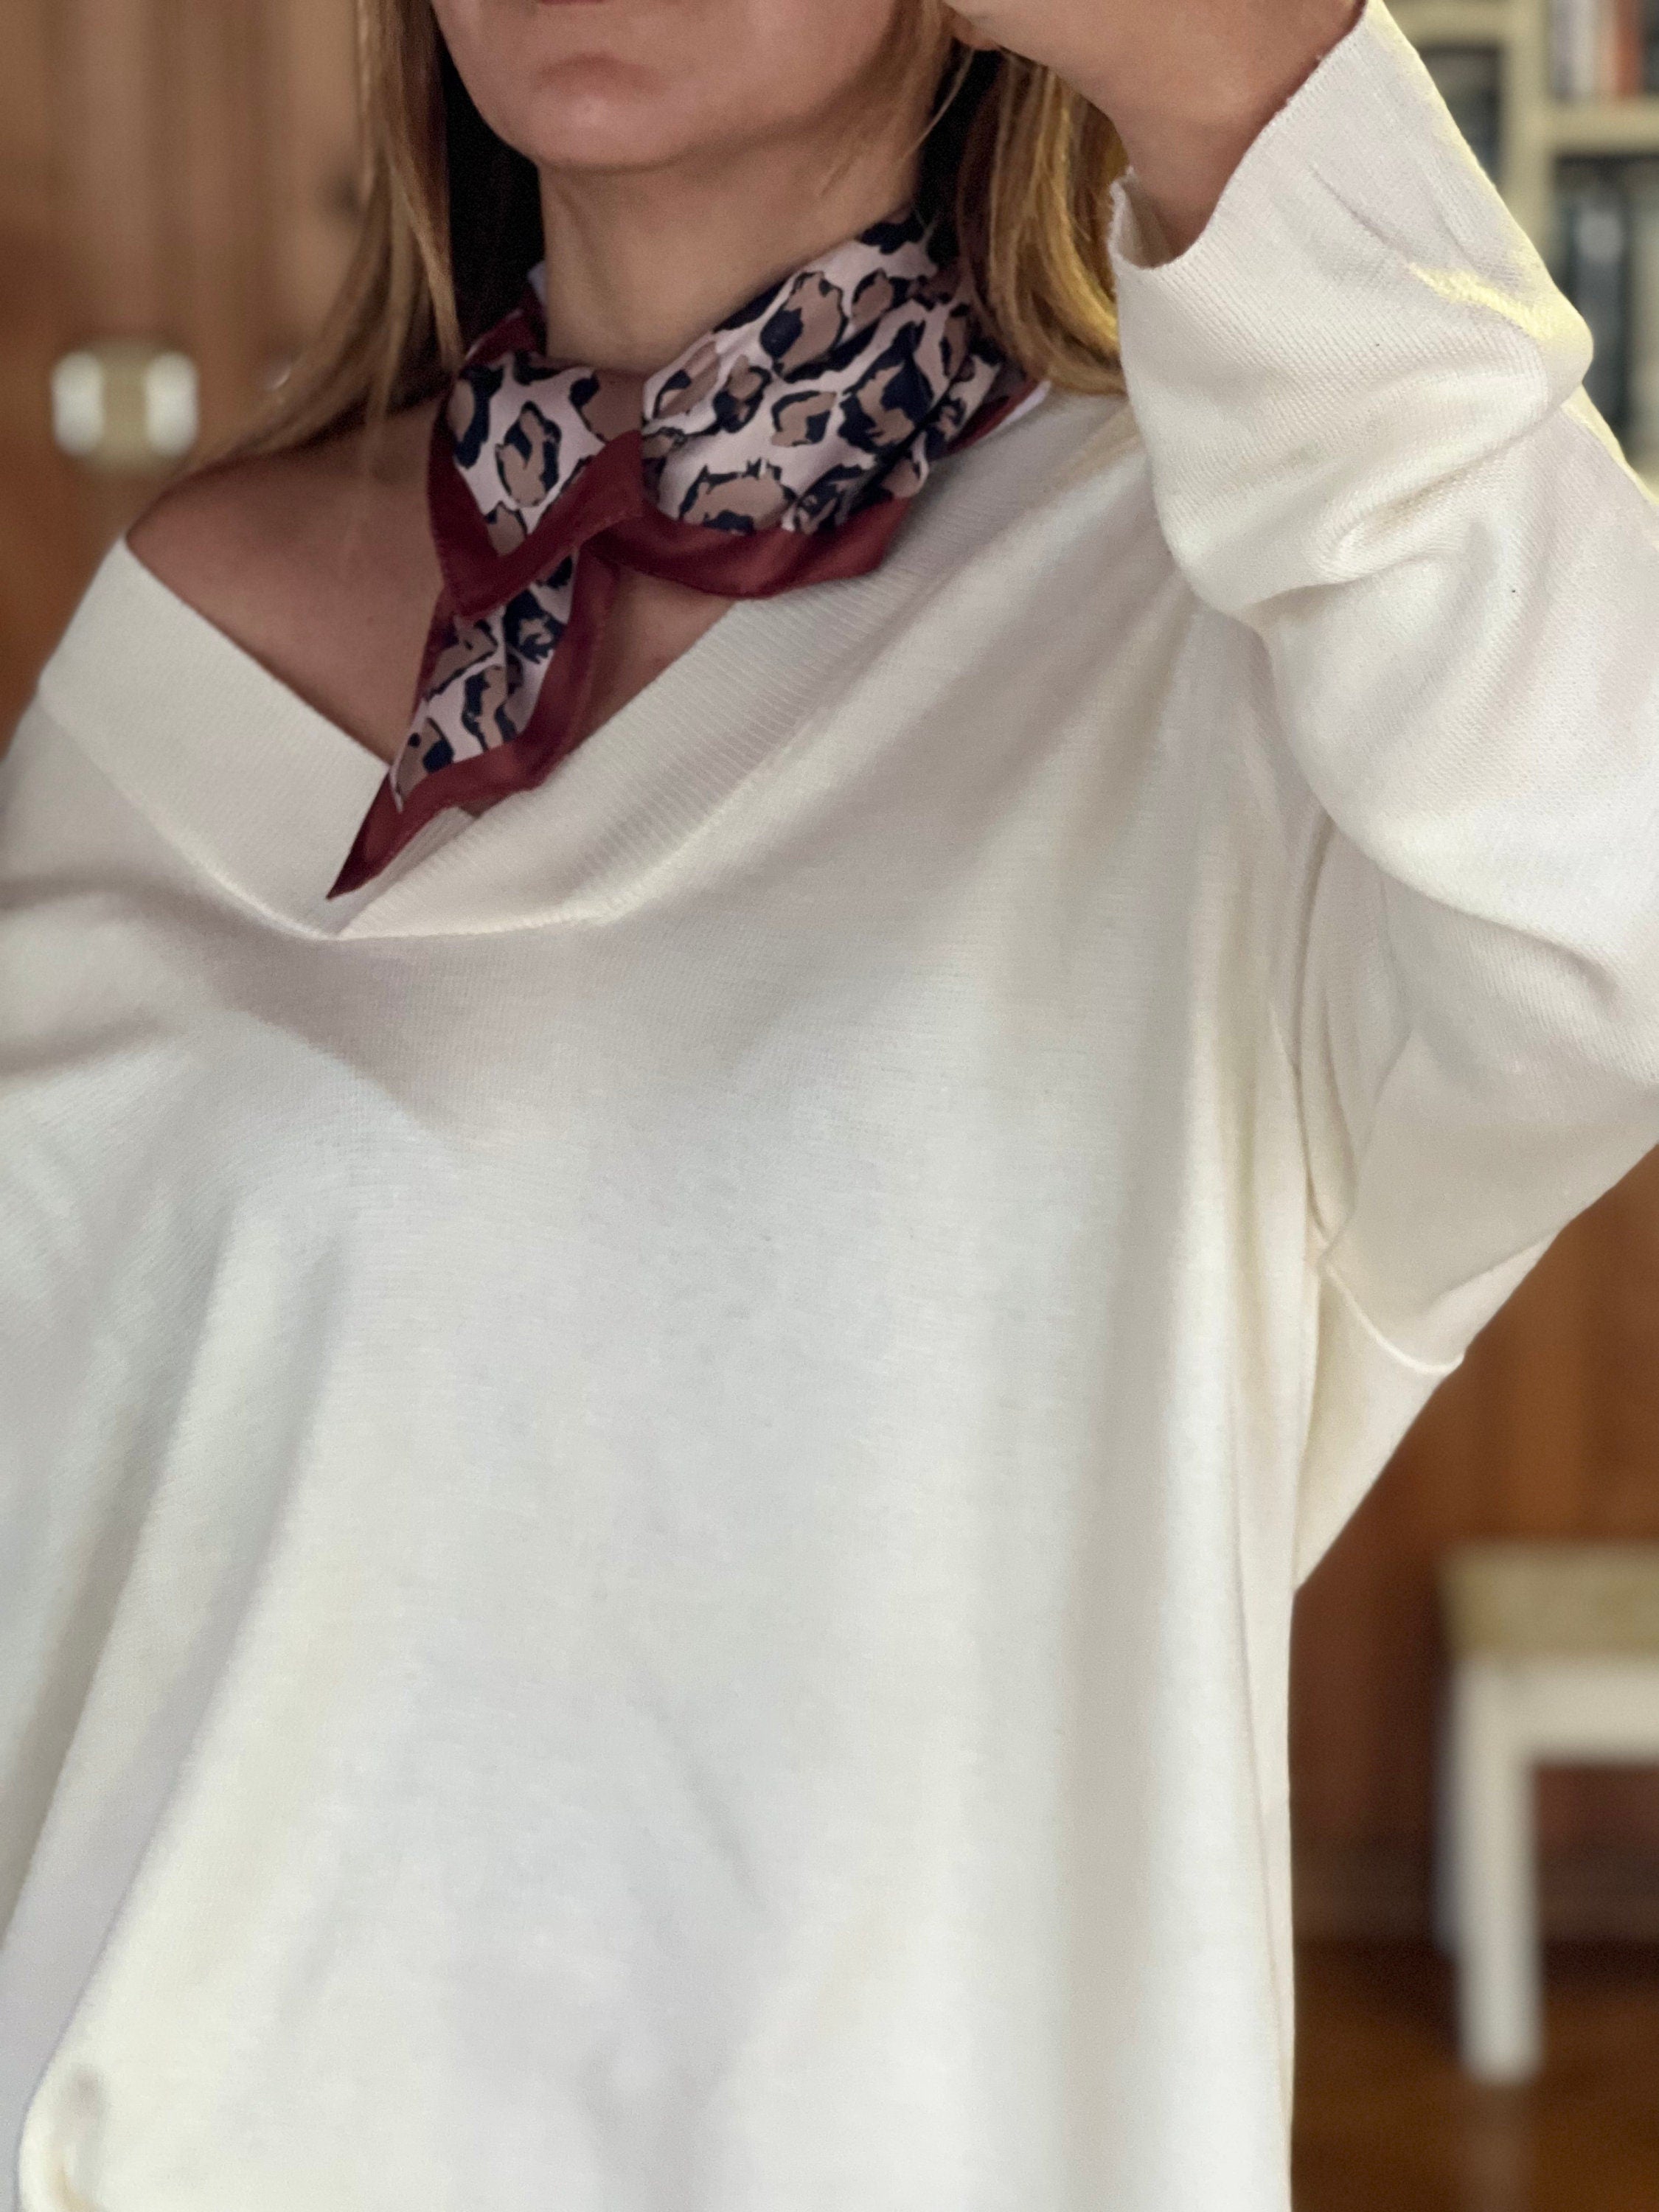 This trendy idea involves tying the scarf and placing it around the neck. Tying the scarf in braid form involves folding the scarf around the neck, taking the loose ends of the scarf, passing them through the loop and ensuring it is not done tightly.